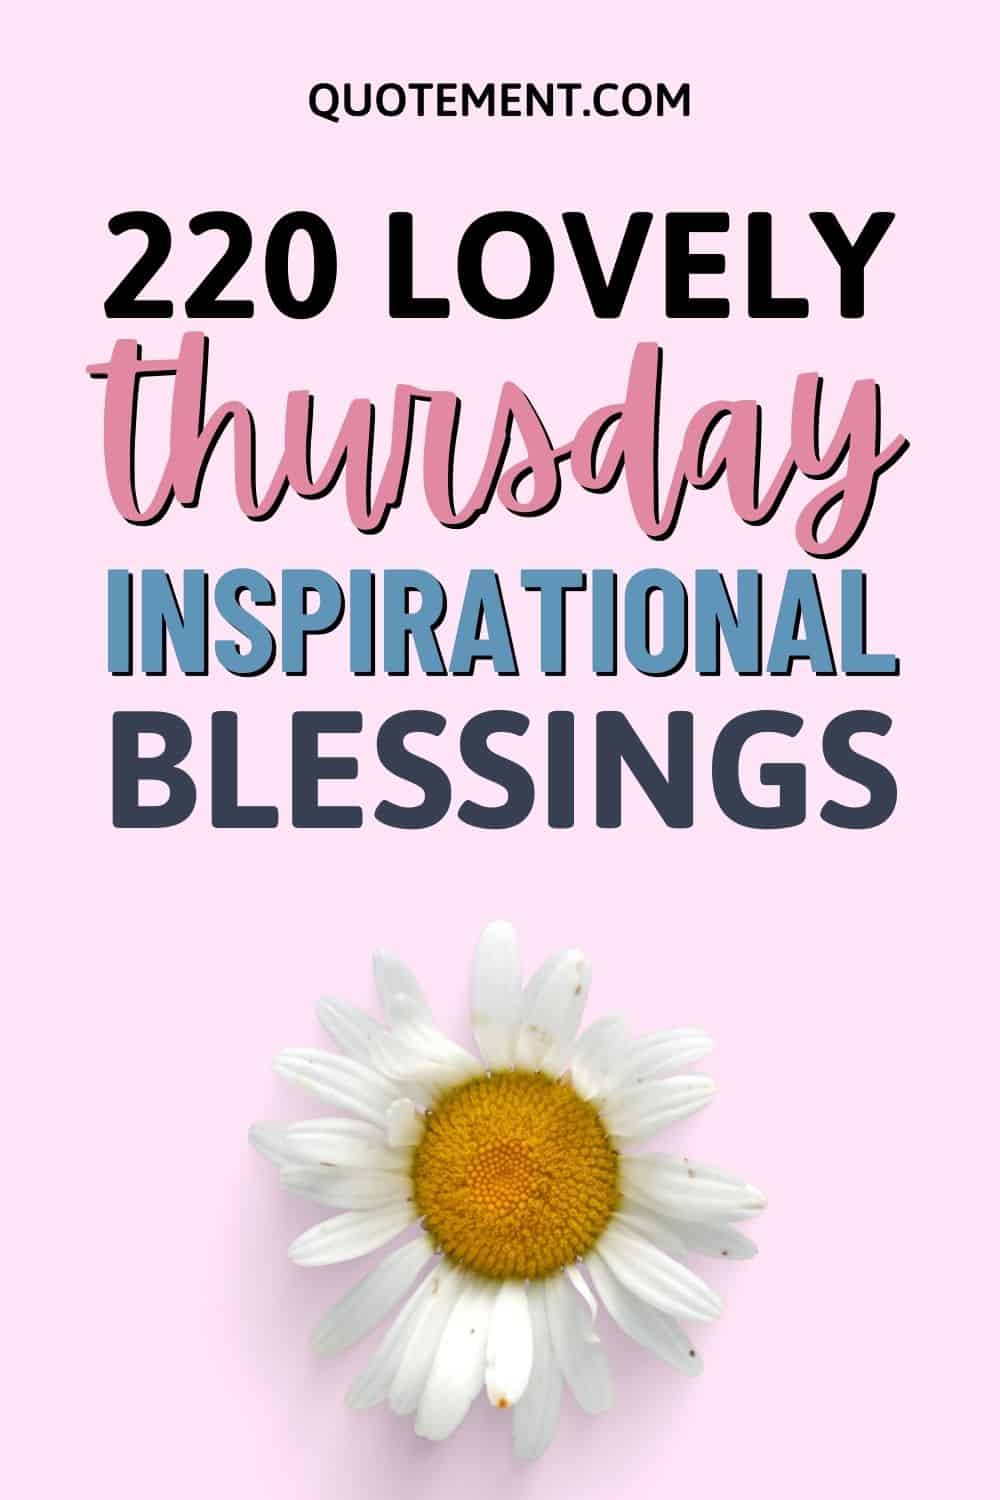 220 Thursday Inspirational Blessings Quotes To Inspire You